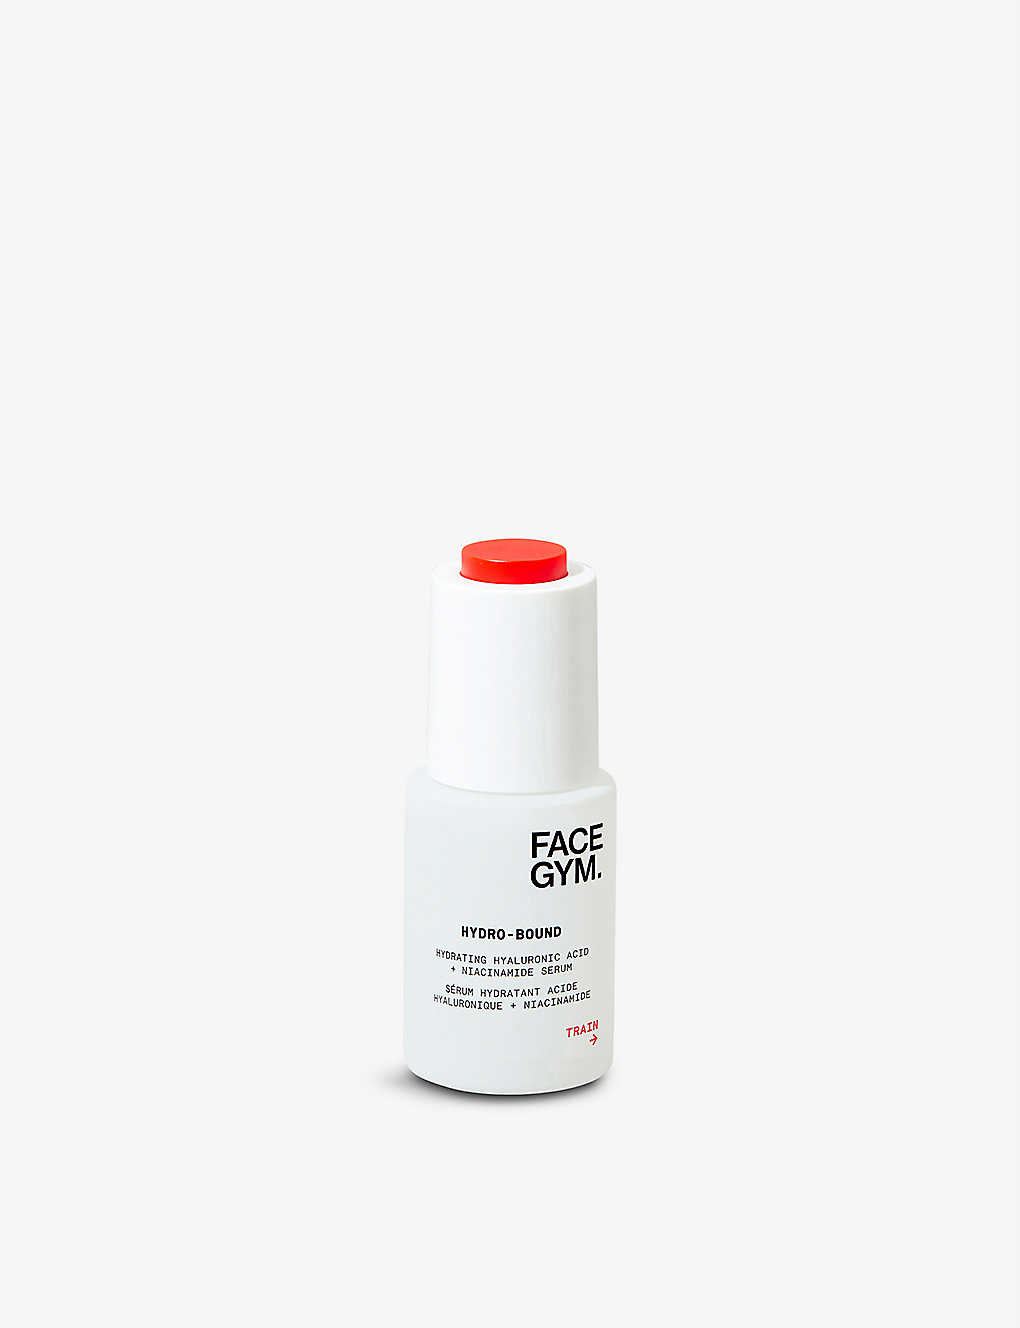 Facegym Hydro-bound Hydrating Hyaluronic Acid + Niacinamide Serum